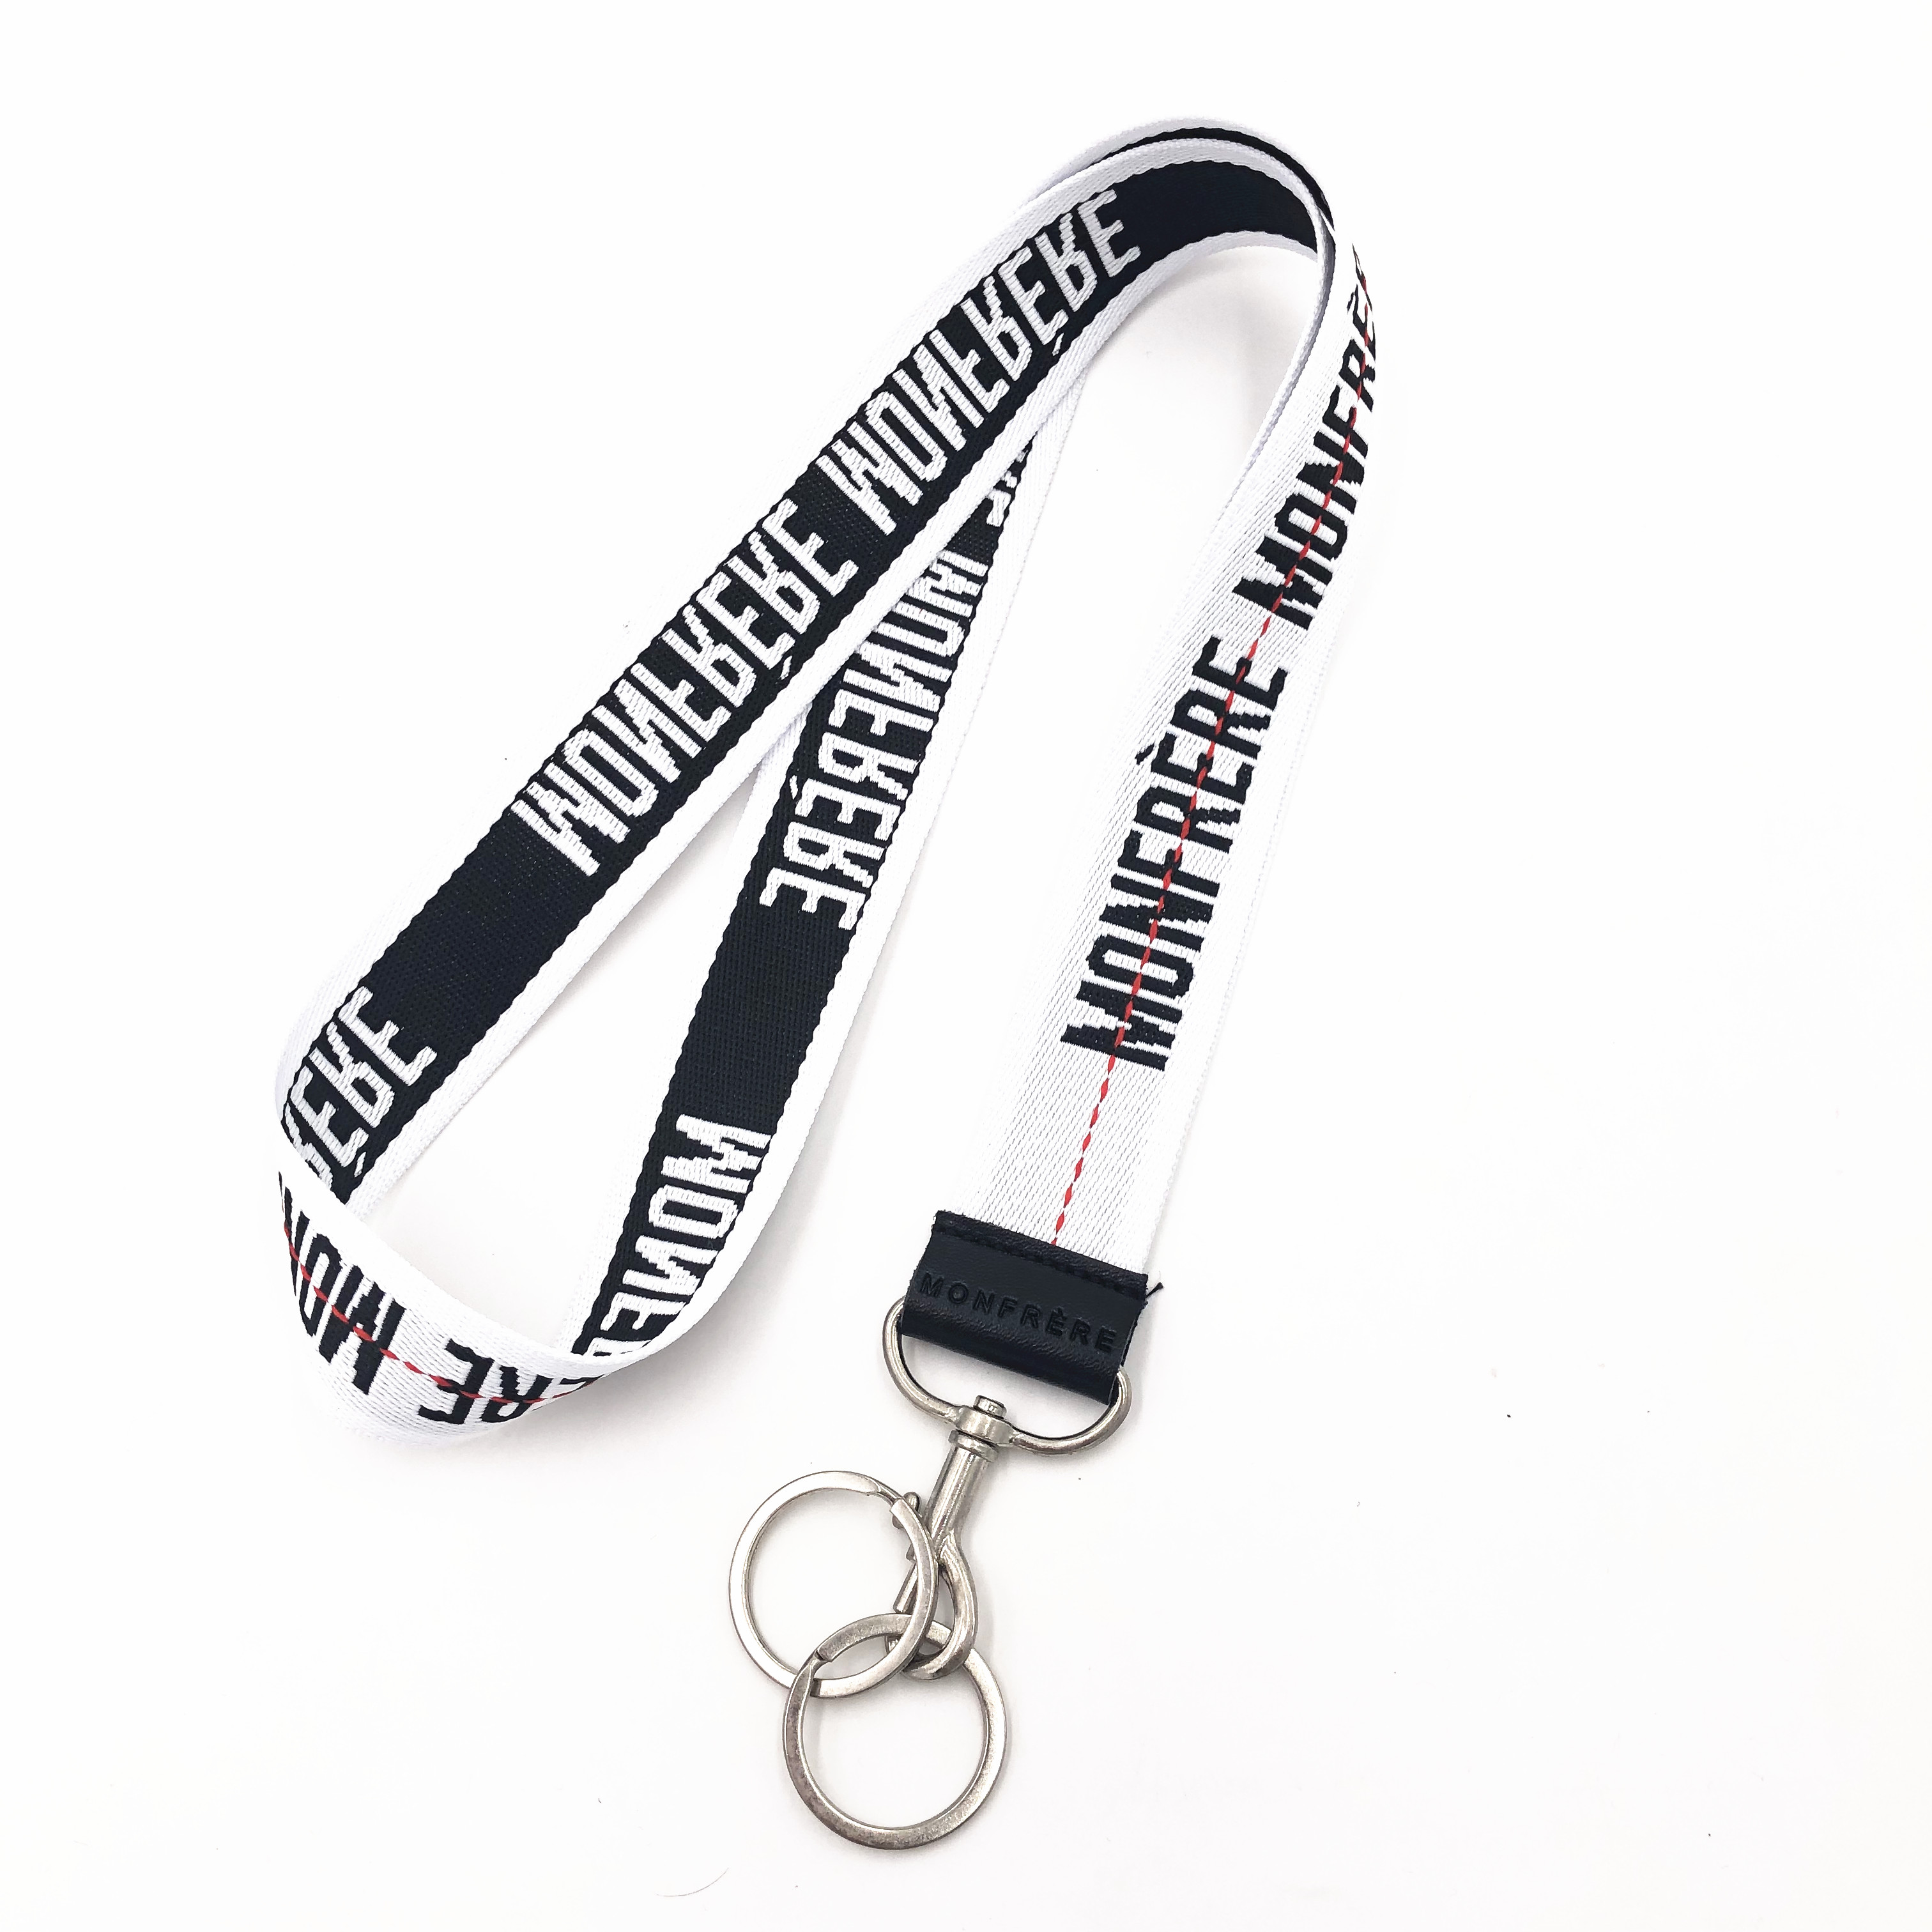 High Quality Woven Fabric Lanyard - Neck Strap Keychain ID Holder Soft Heavy Duty Neck Woven Lanyard – Bison